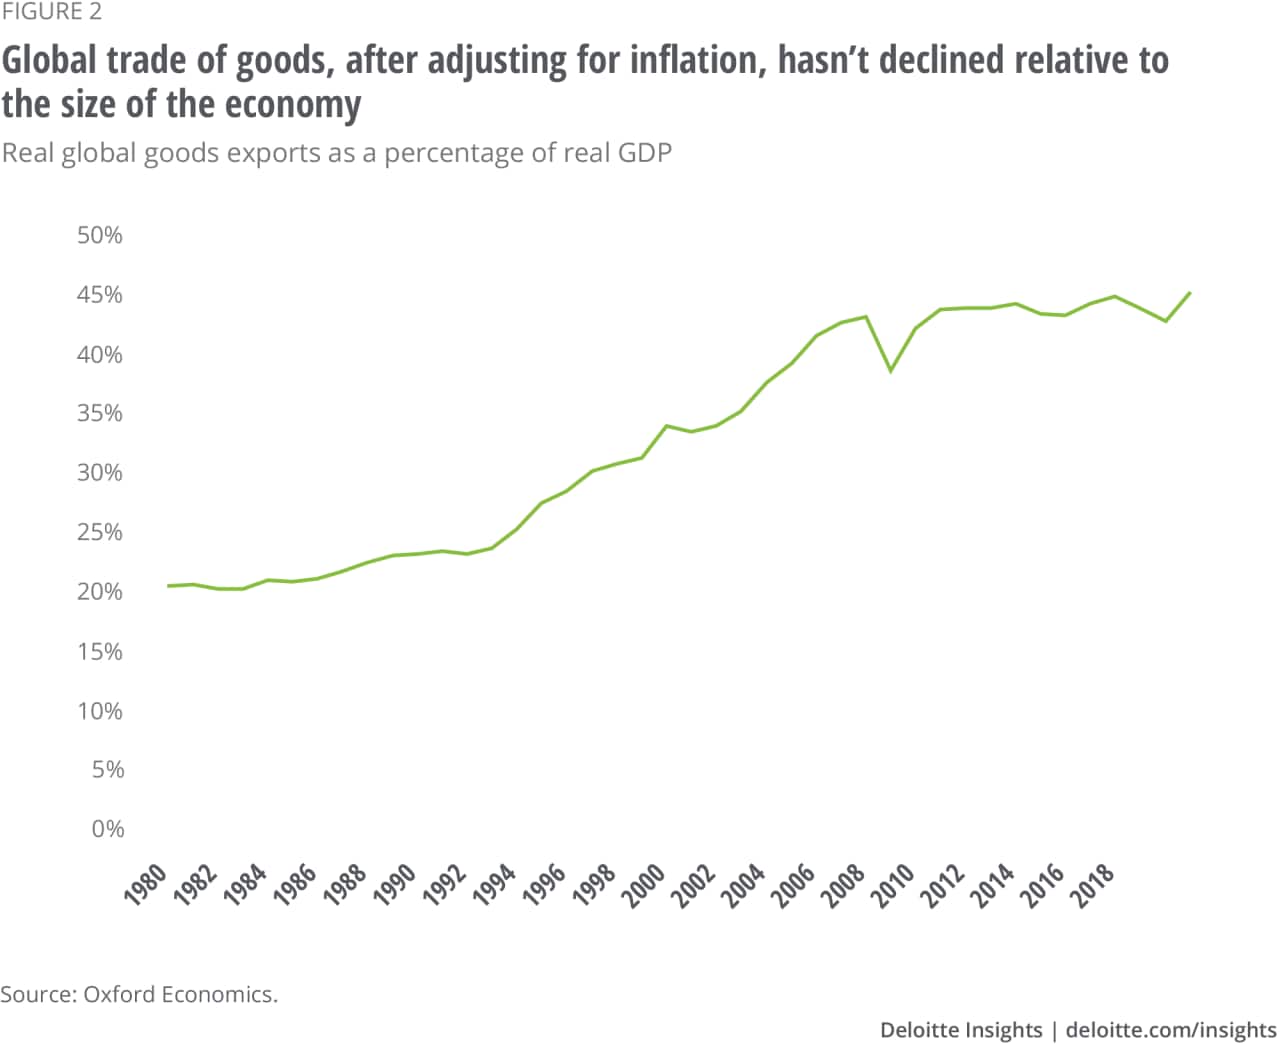 Figure 2. Global trade of goods, after adjusting for inflation, hasn’t declined relative to the size of the economy